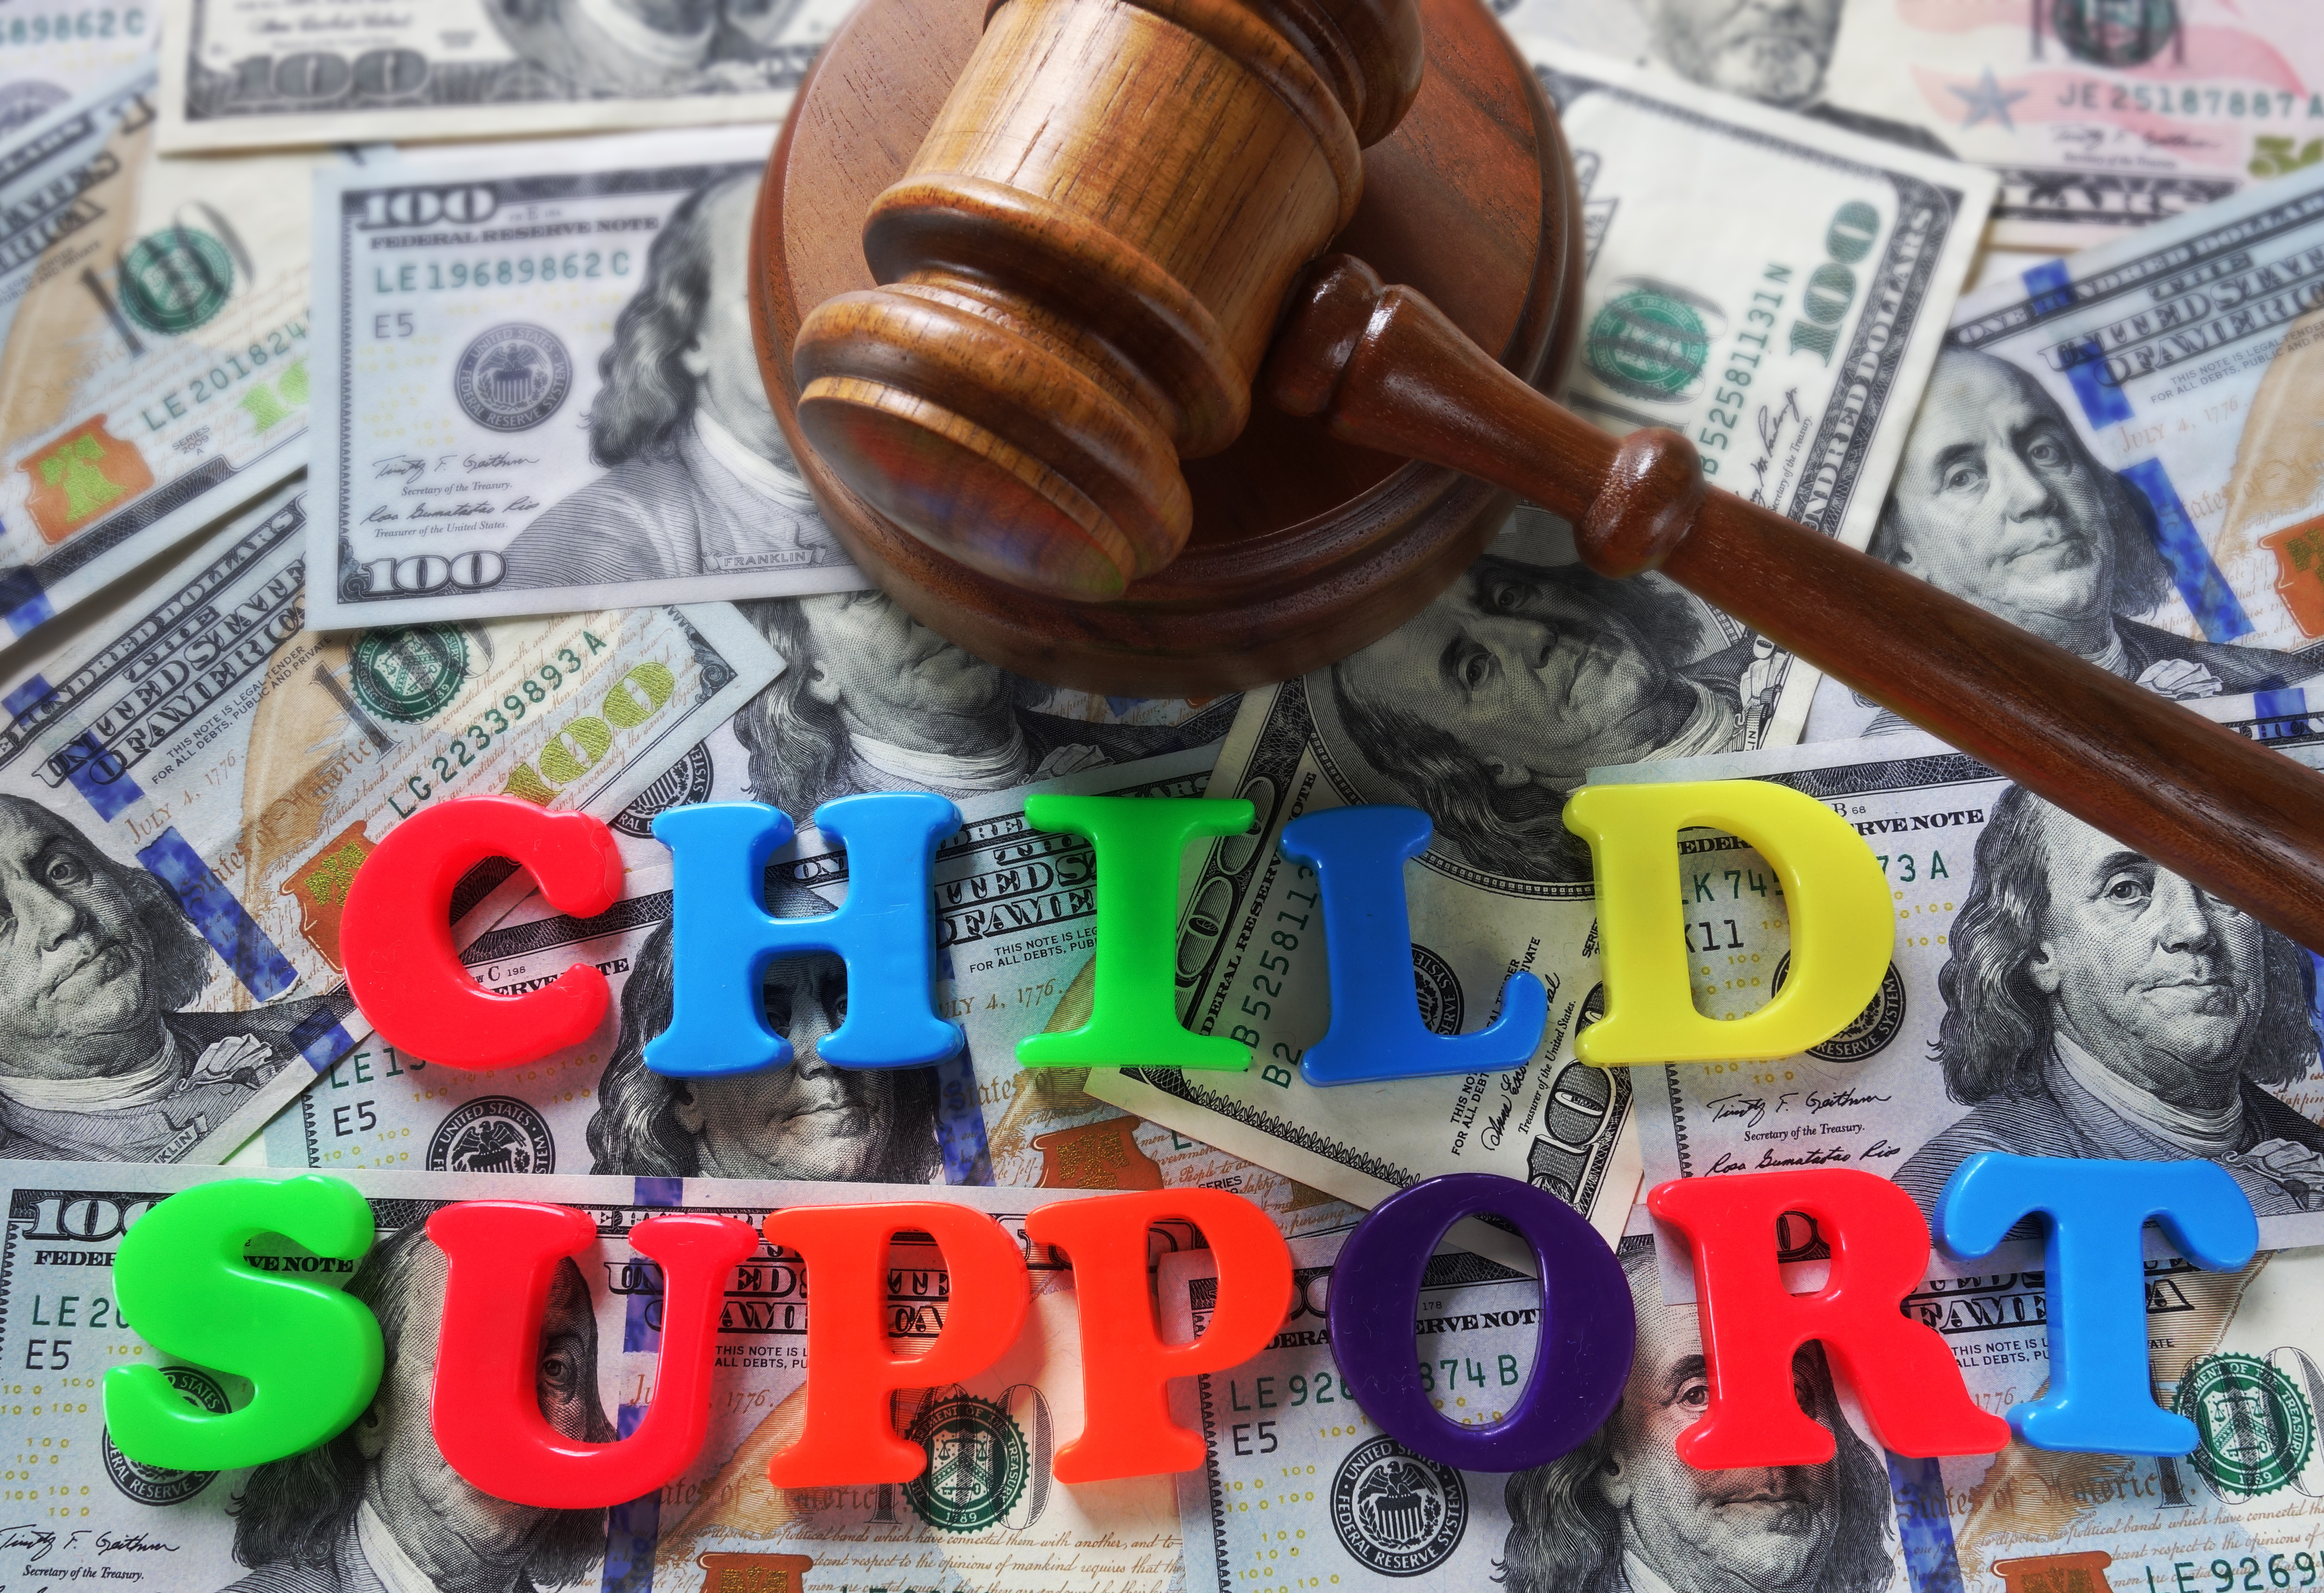 Sample Letter For Termination Of Child Support from dadsdivorce.com